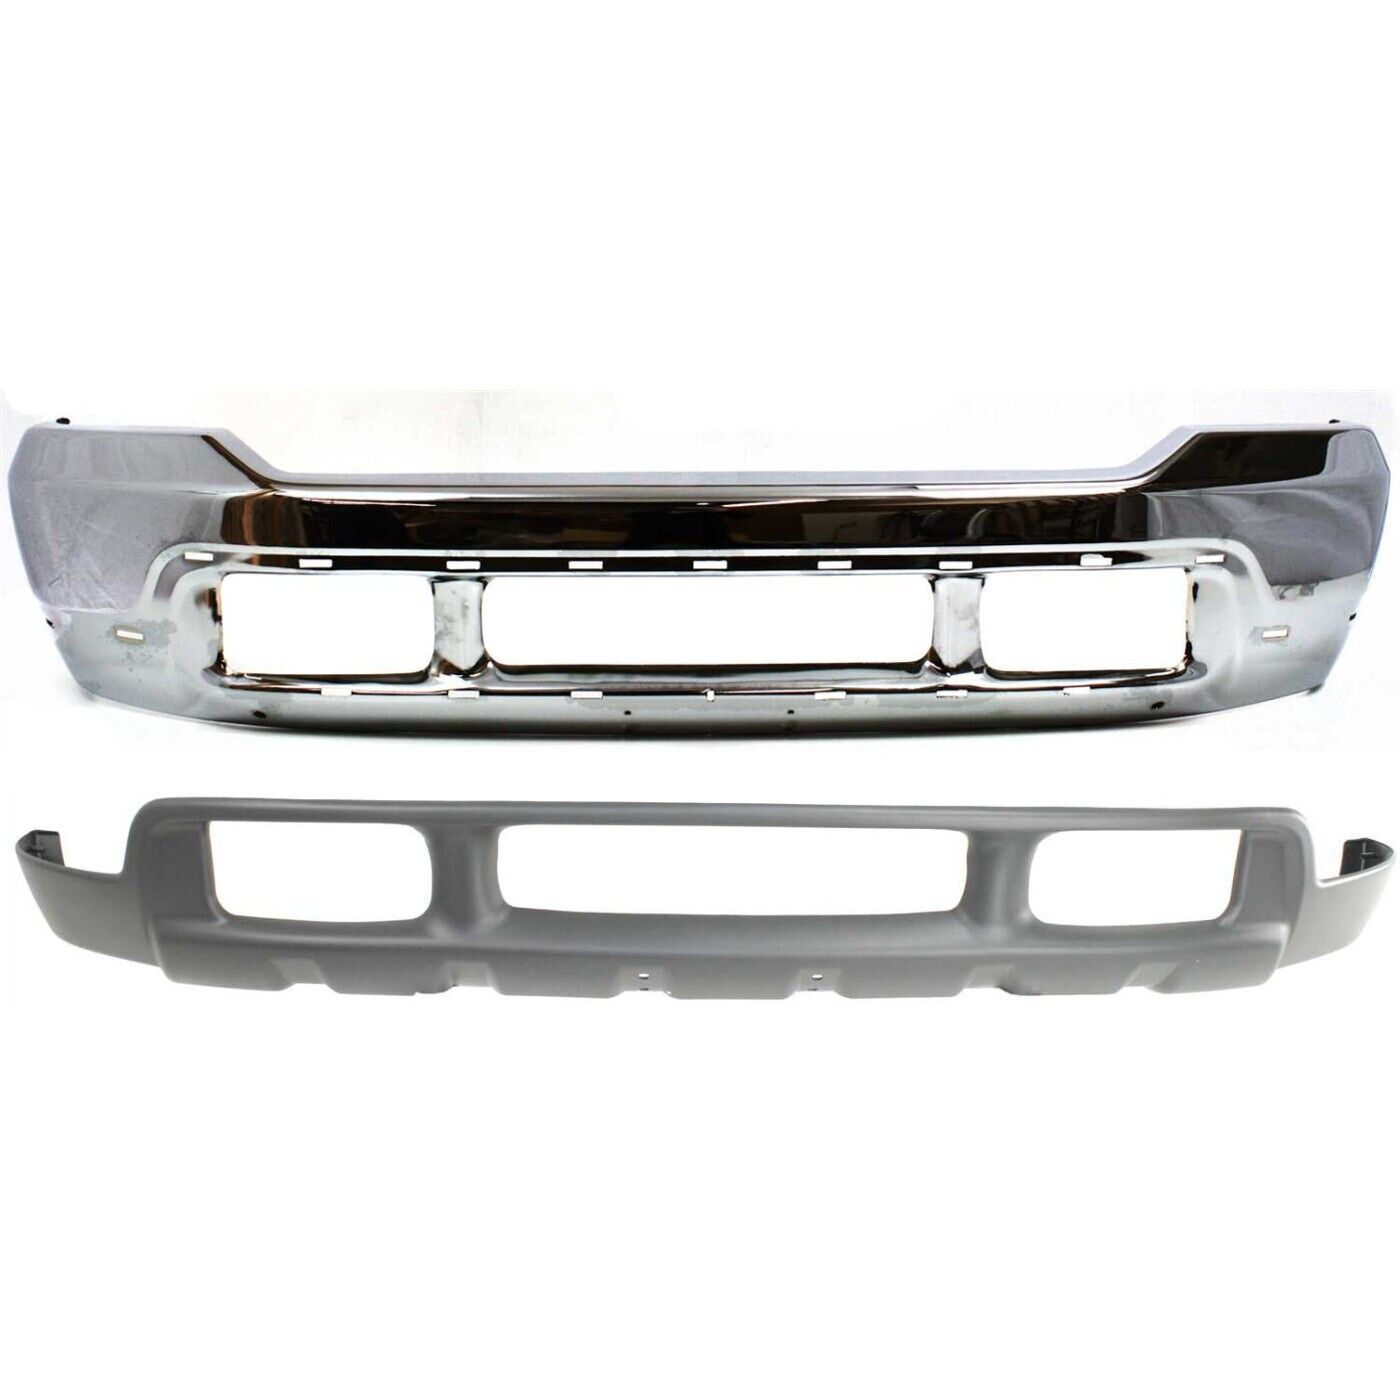 Bumper Kit For 1999-04 Ford F-250 Super Duty F-Series Front Chrome with Valance